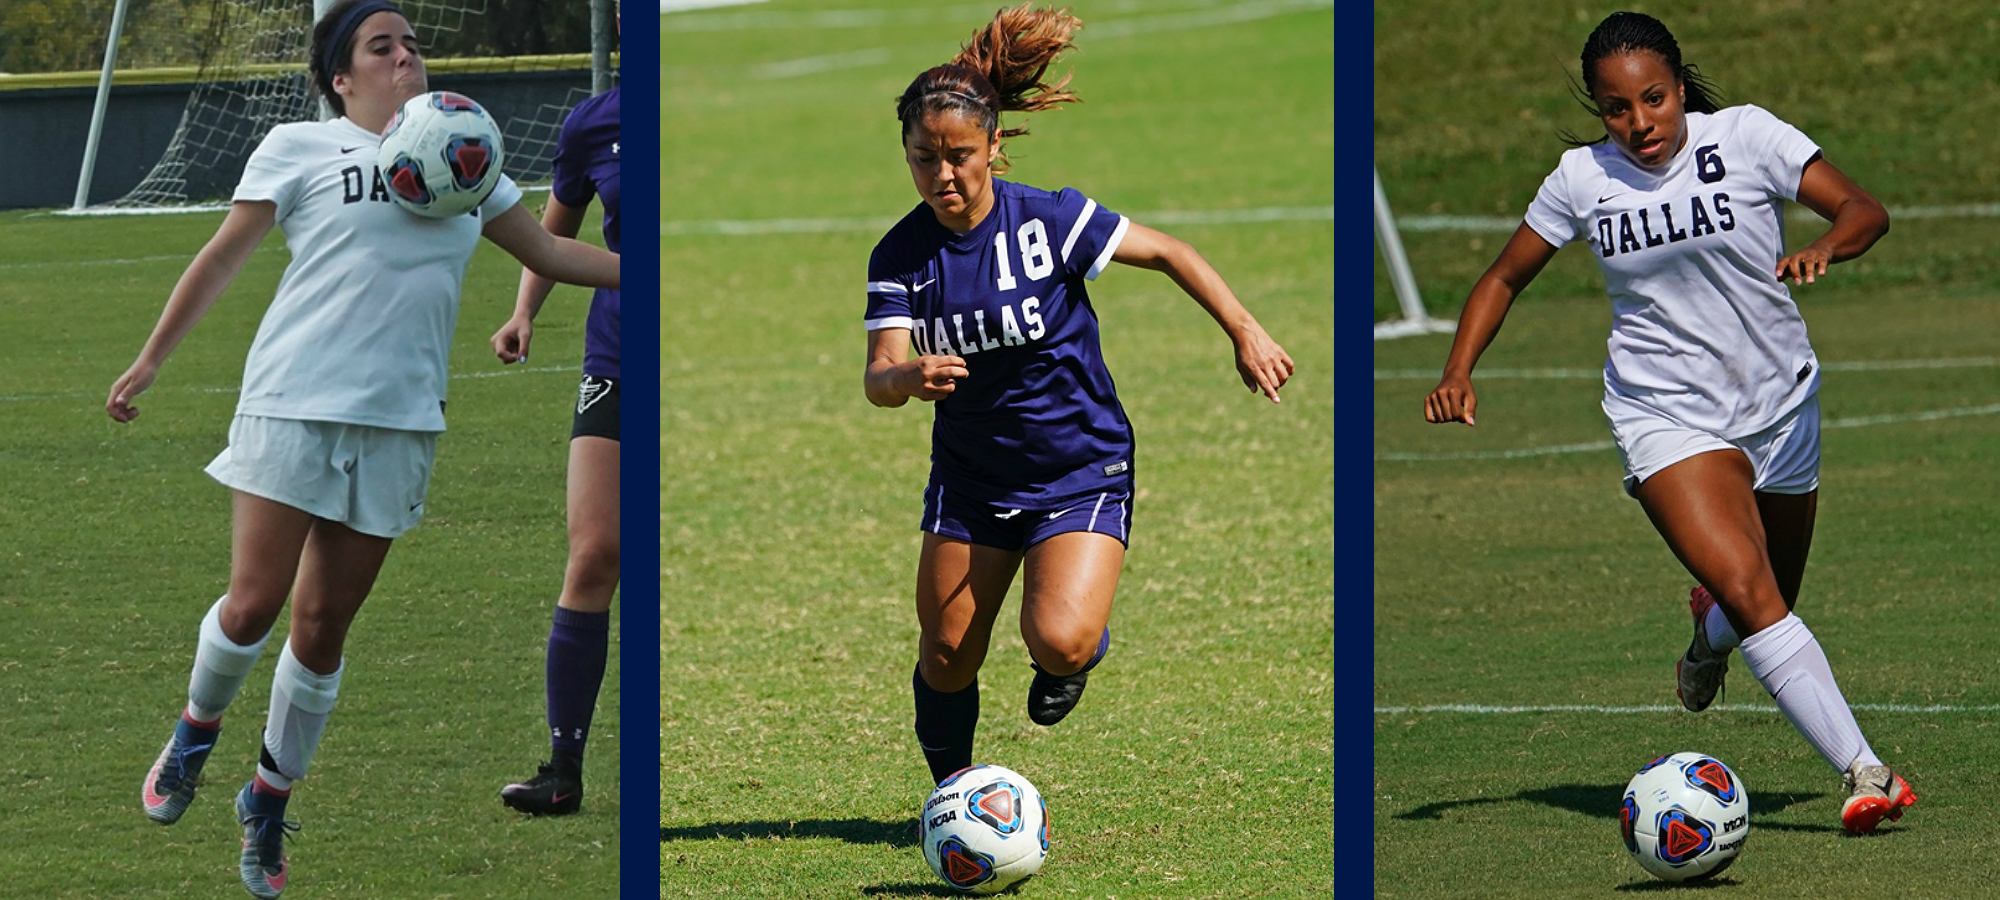 Women's Soccer Trio gets Named to All-SCAC Teams